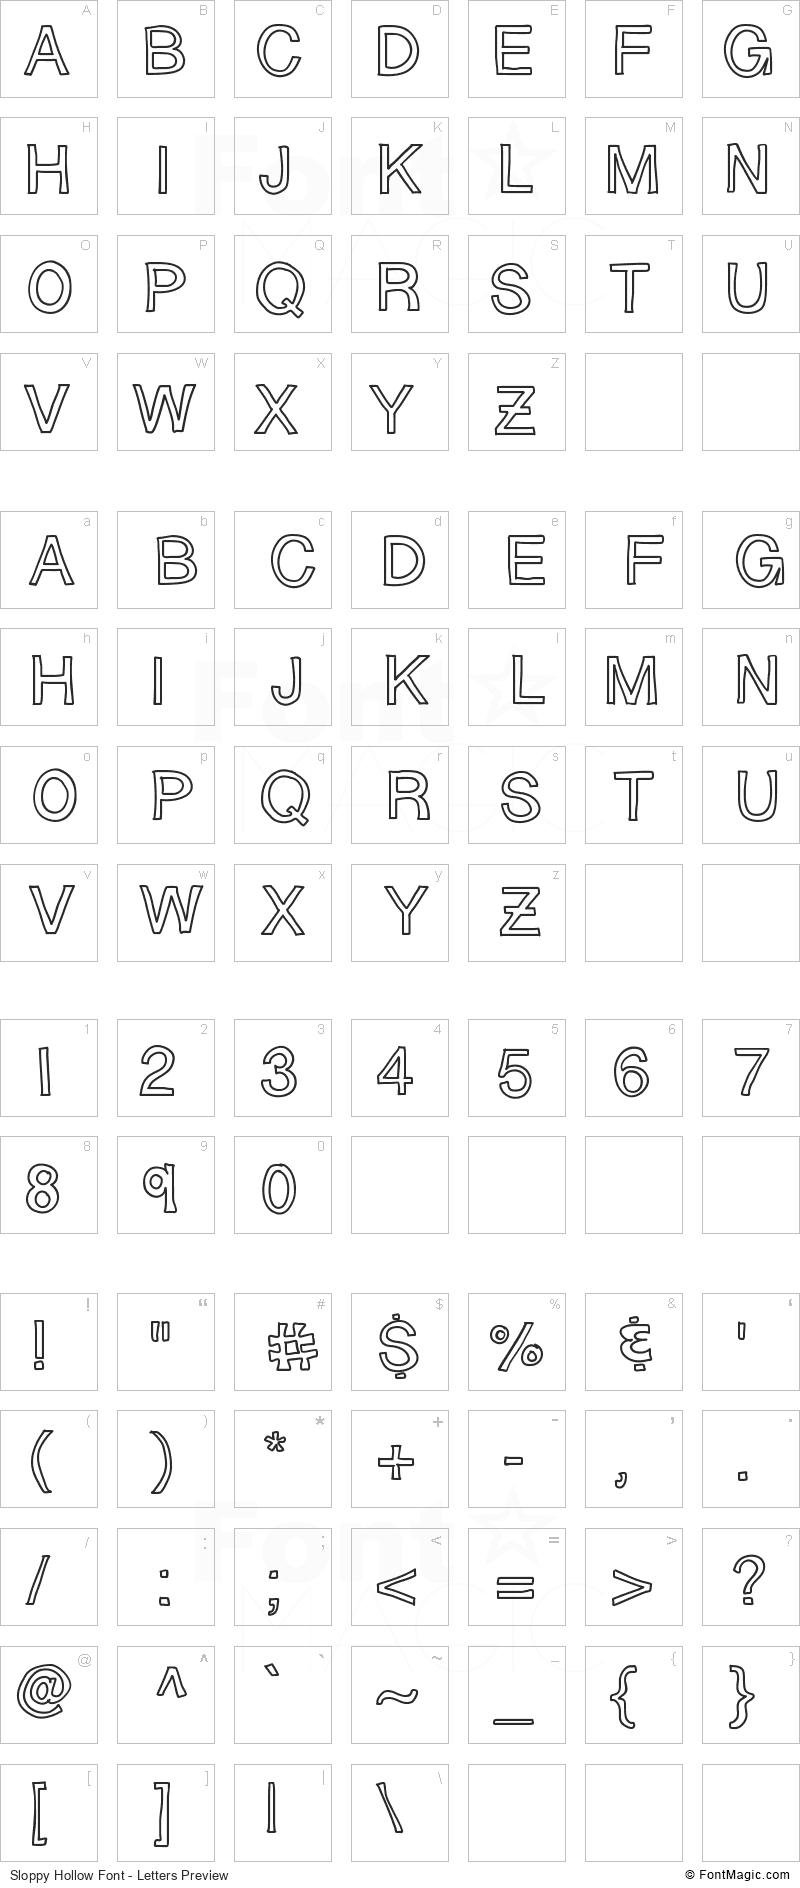 Sloppy Hollow Font - All Latters Preview Chart